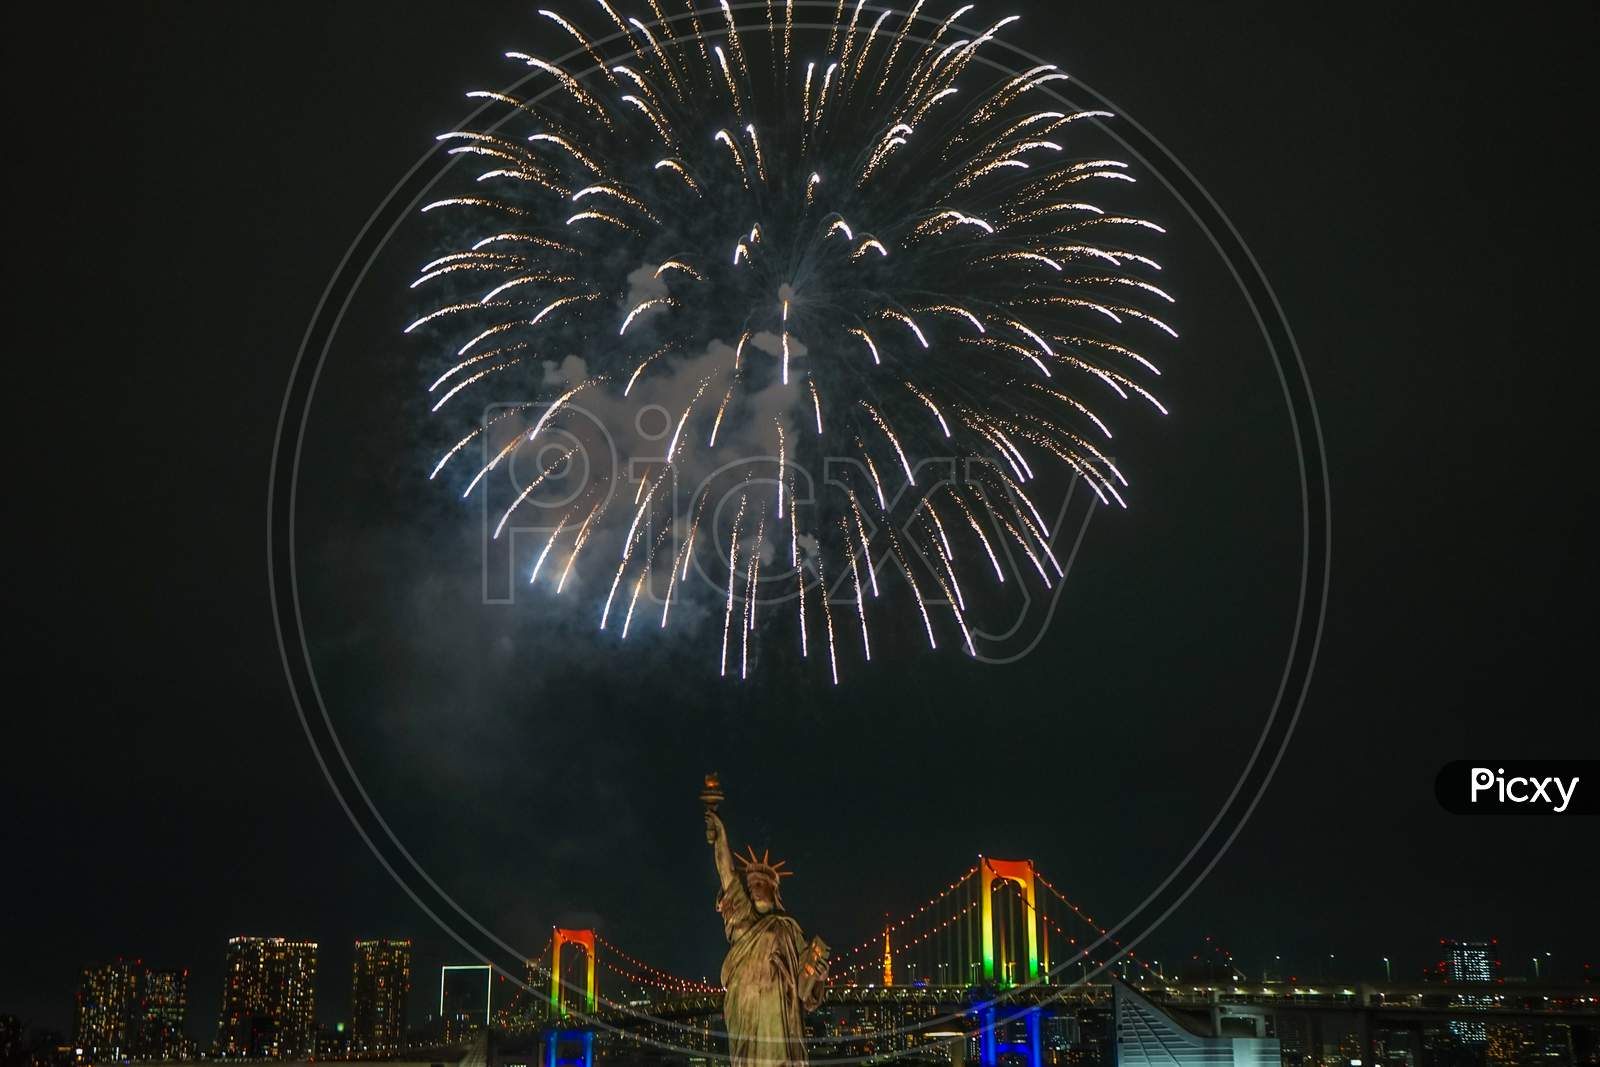 Image Of Tokyo Night View And Fireworks Odaiba Rainbow Fireworks 19 Lm Picxy